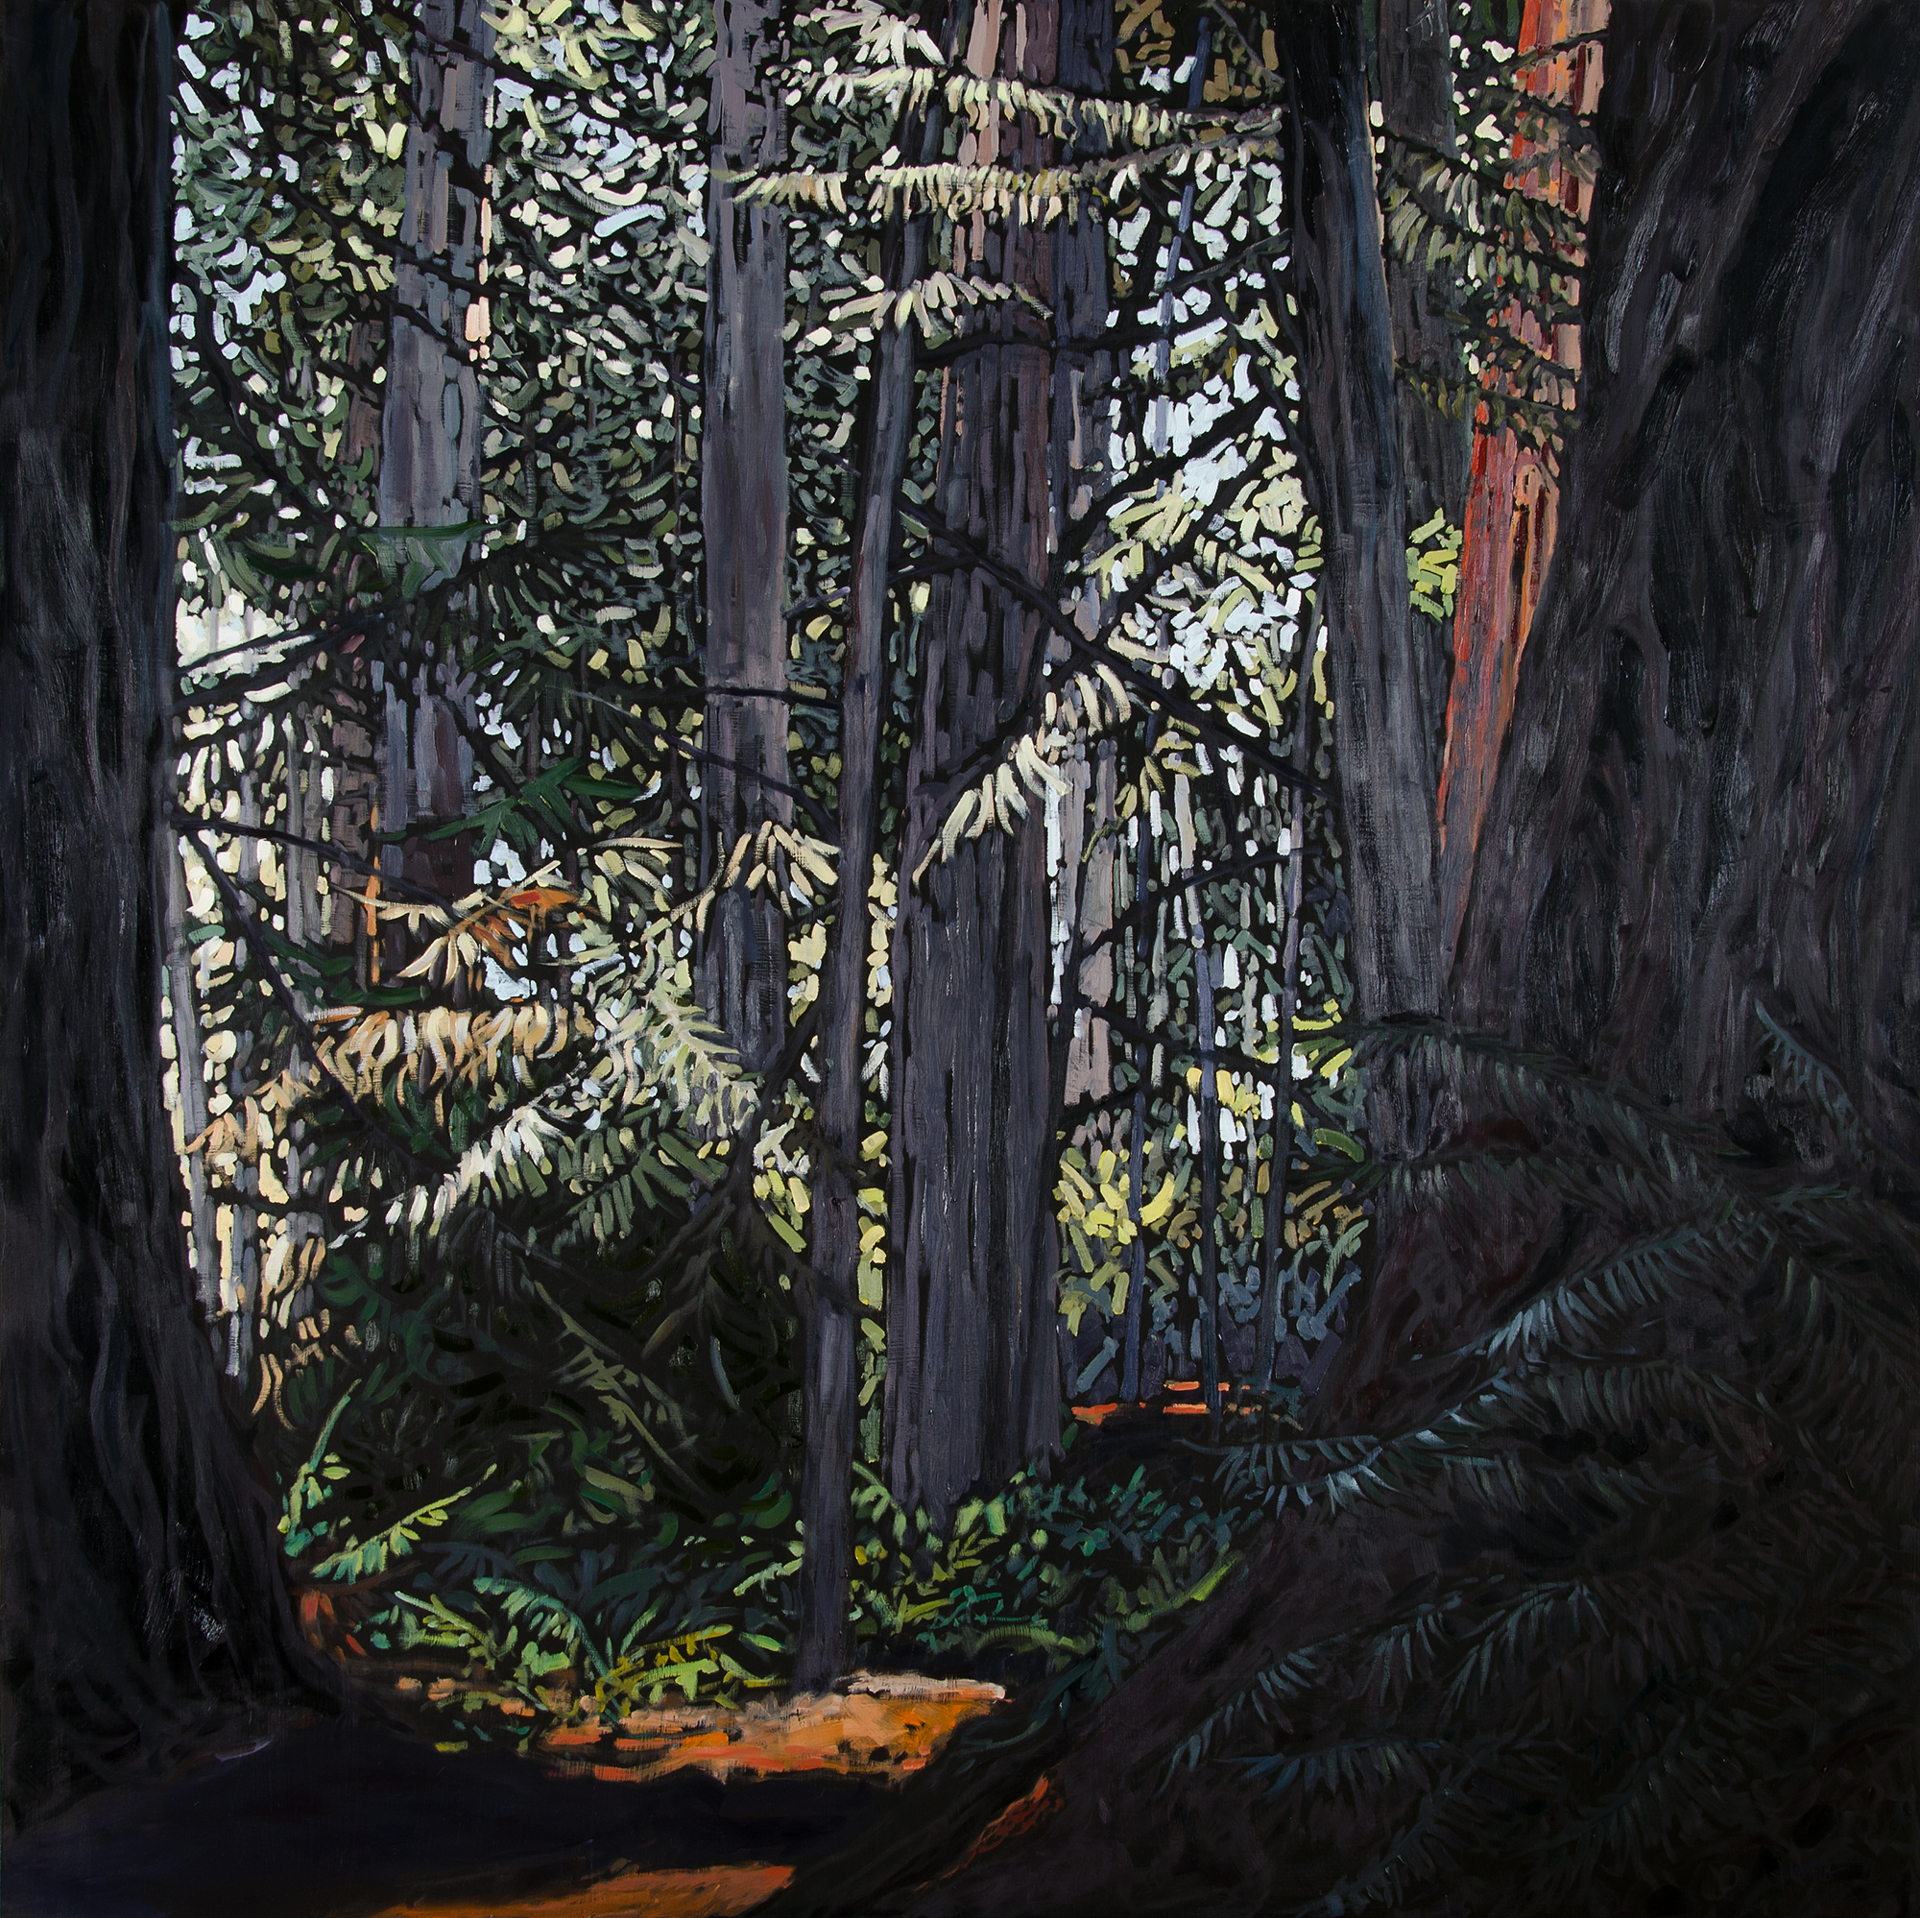 The Forest Awakens by Deb Komitor